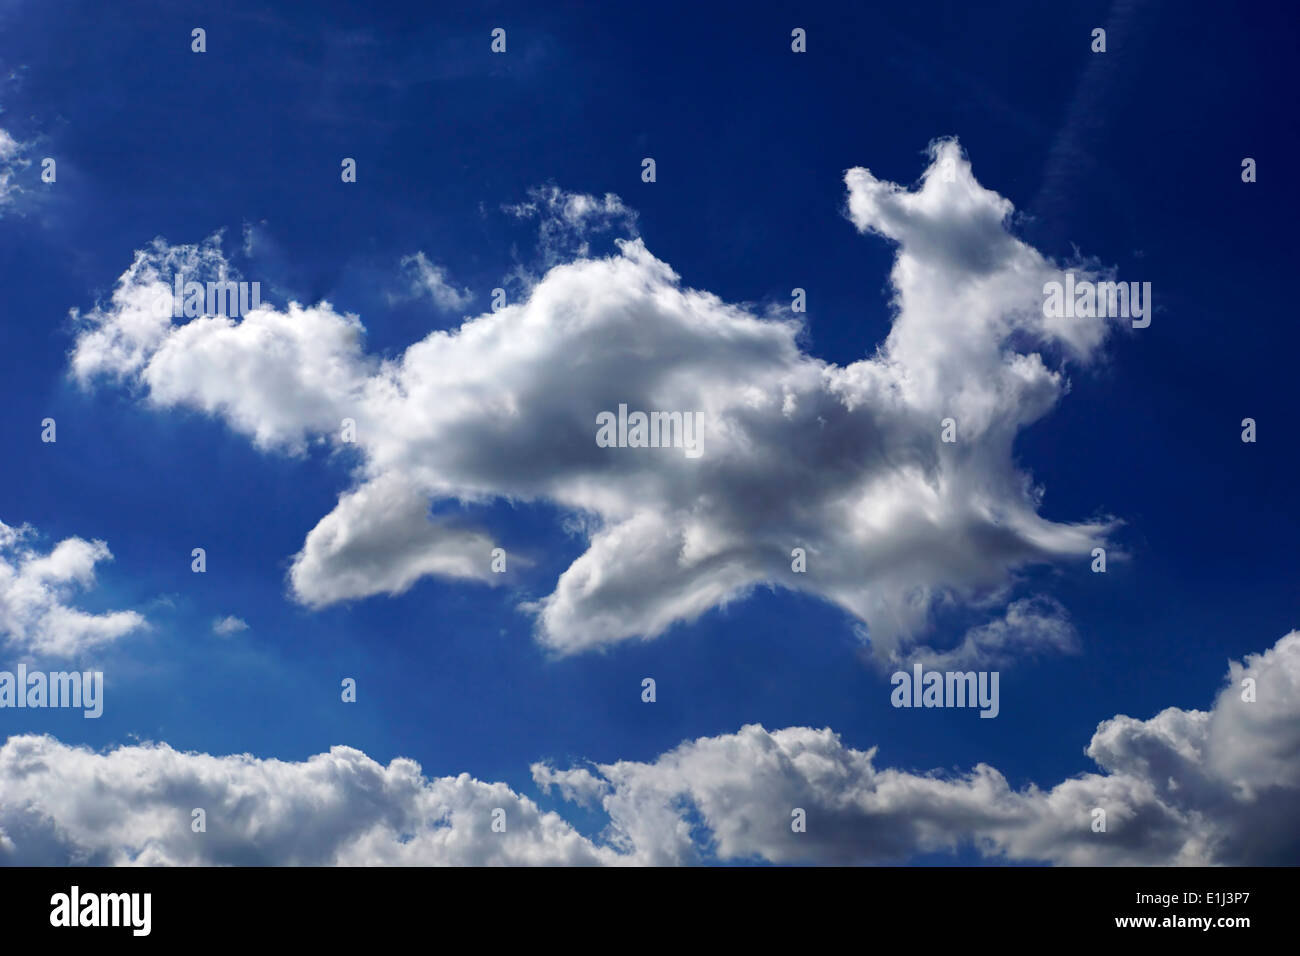 Germany, North Rhine-Westphalia, Cloud formation in form of a dog Stock Photo